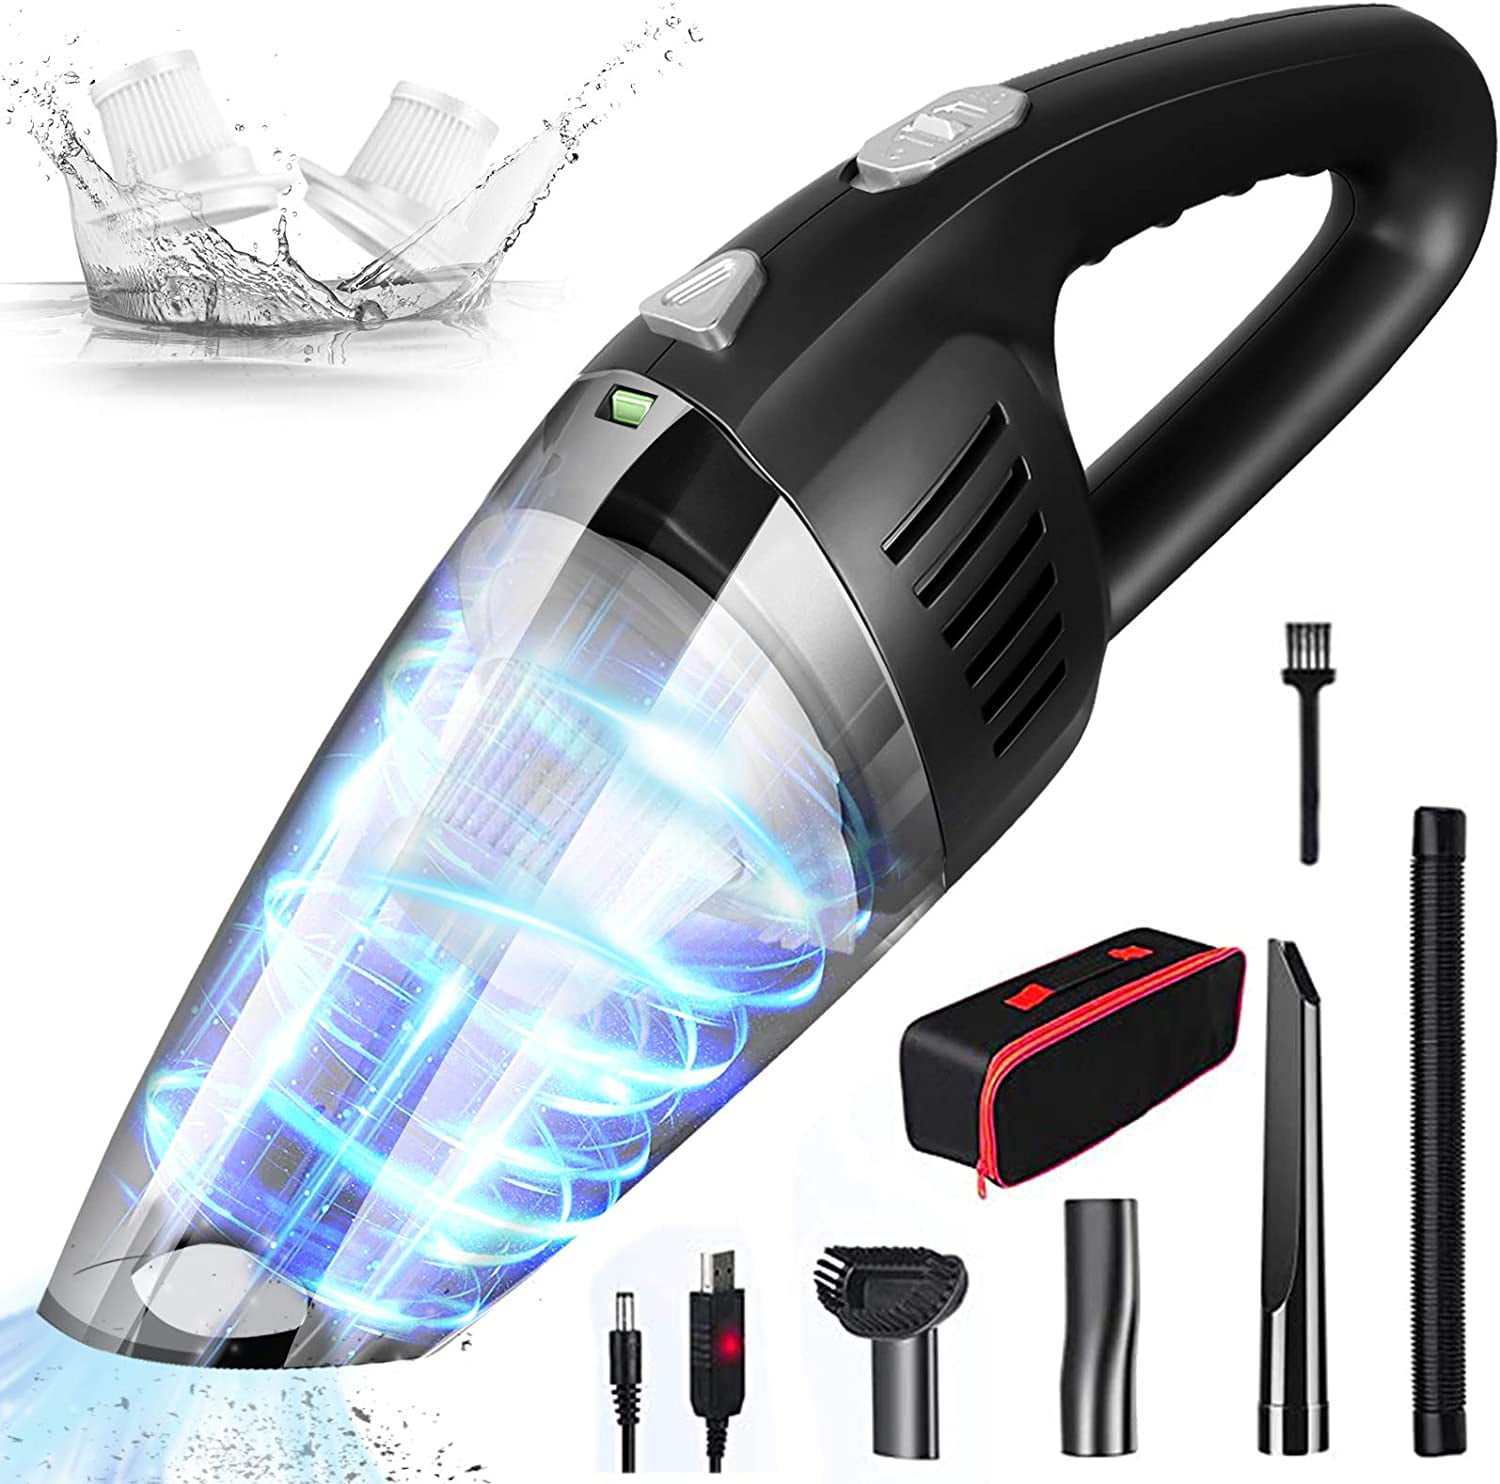 Wet & Dry Vacuum Cleaner Car Cordless Handheld Rechargeable Home Portable 120W 